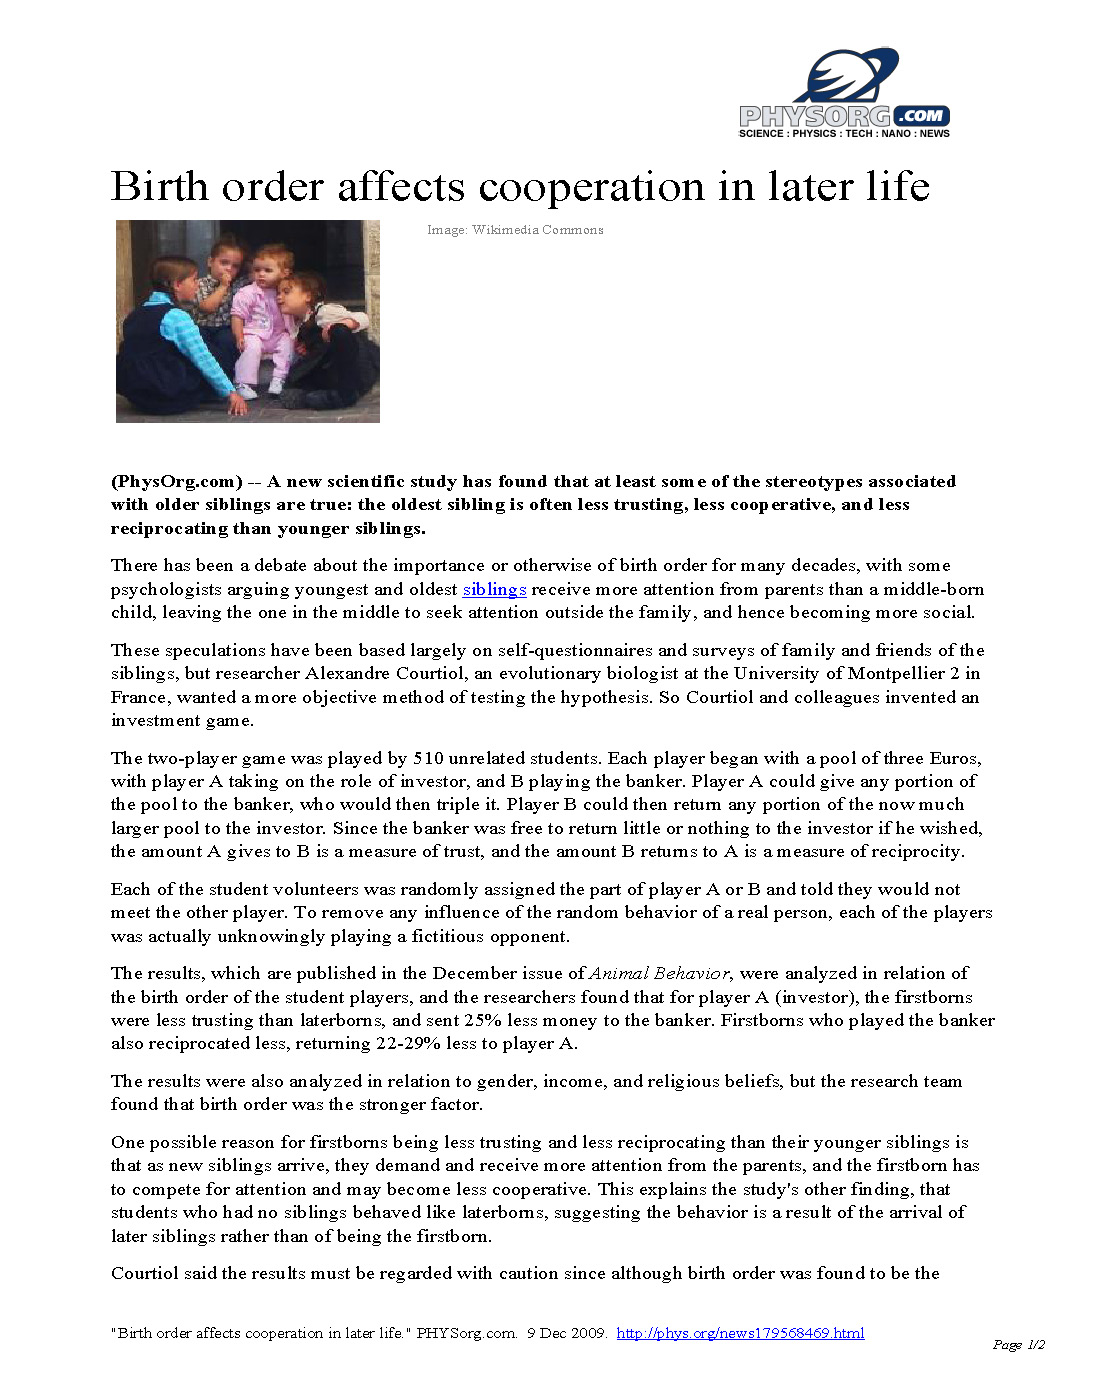 Image de l'article Birth order affects cooperation in later life